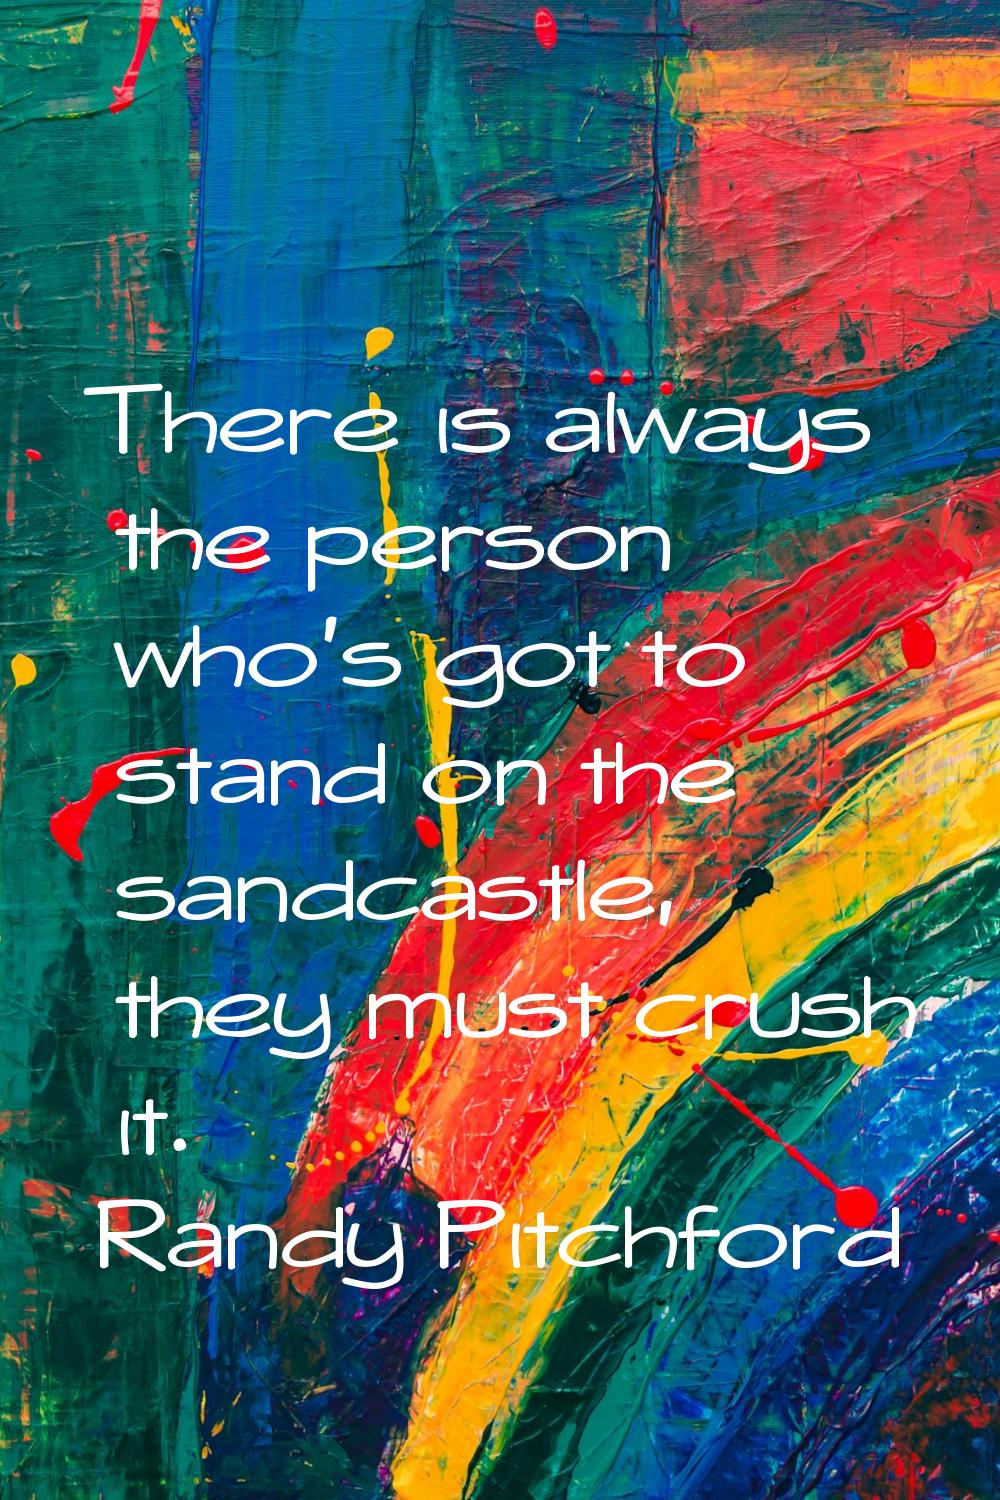 There is always the person who's got to stand on the sandcastle, they must crush it.